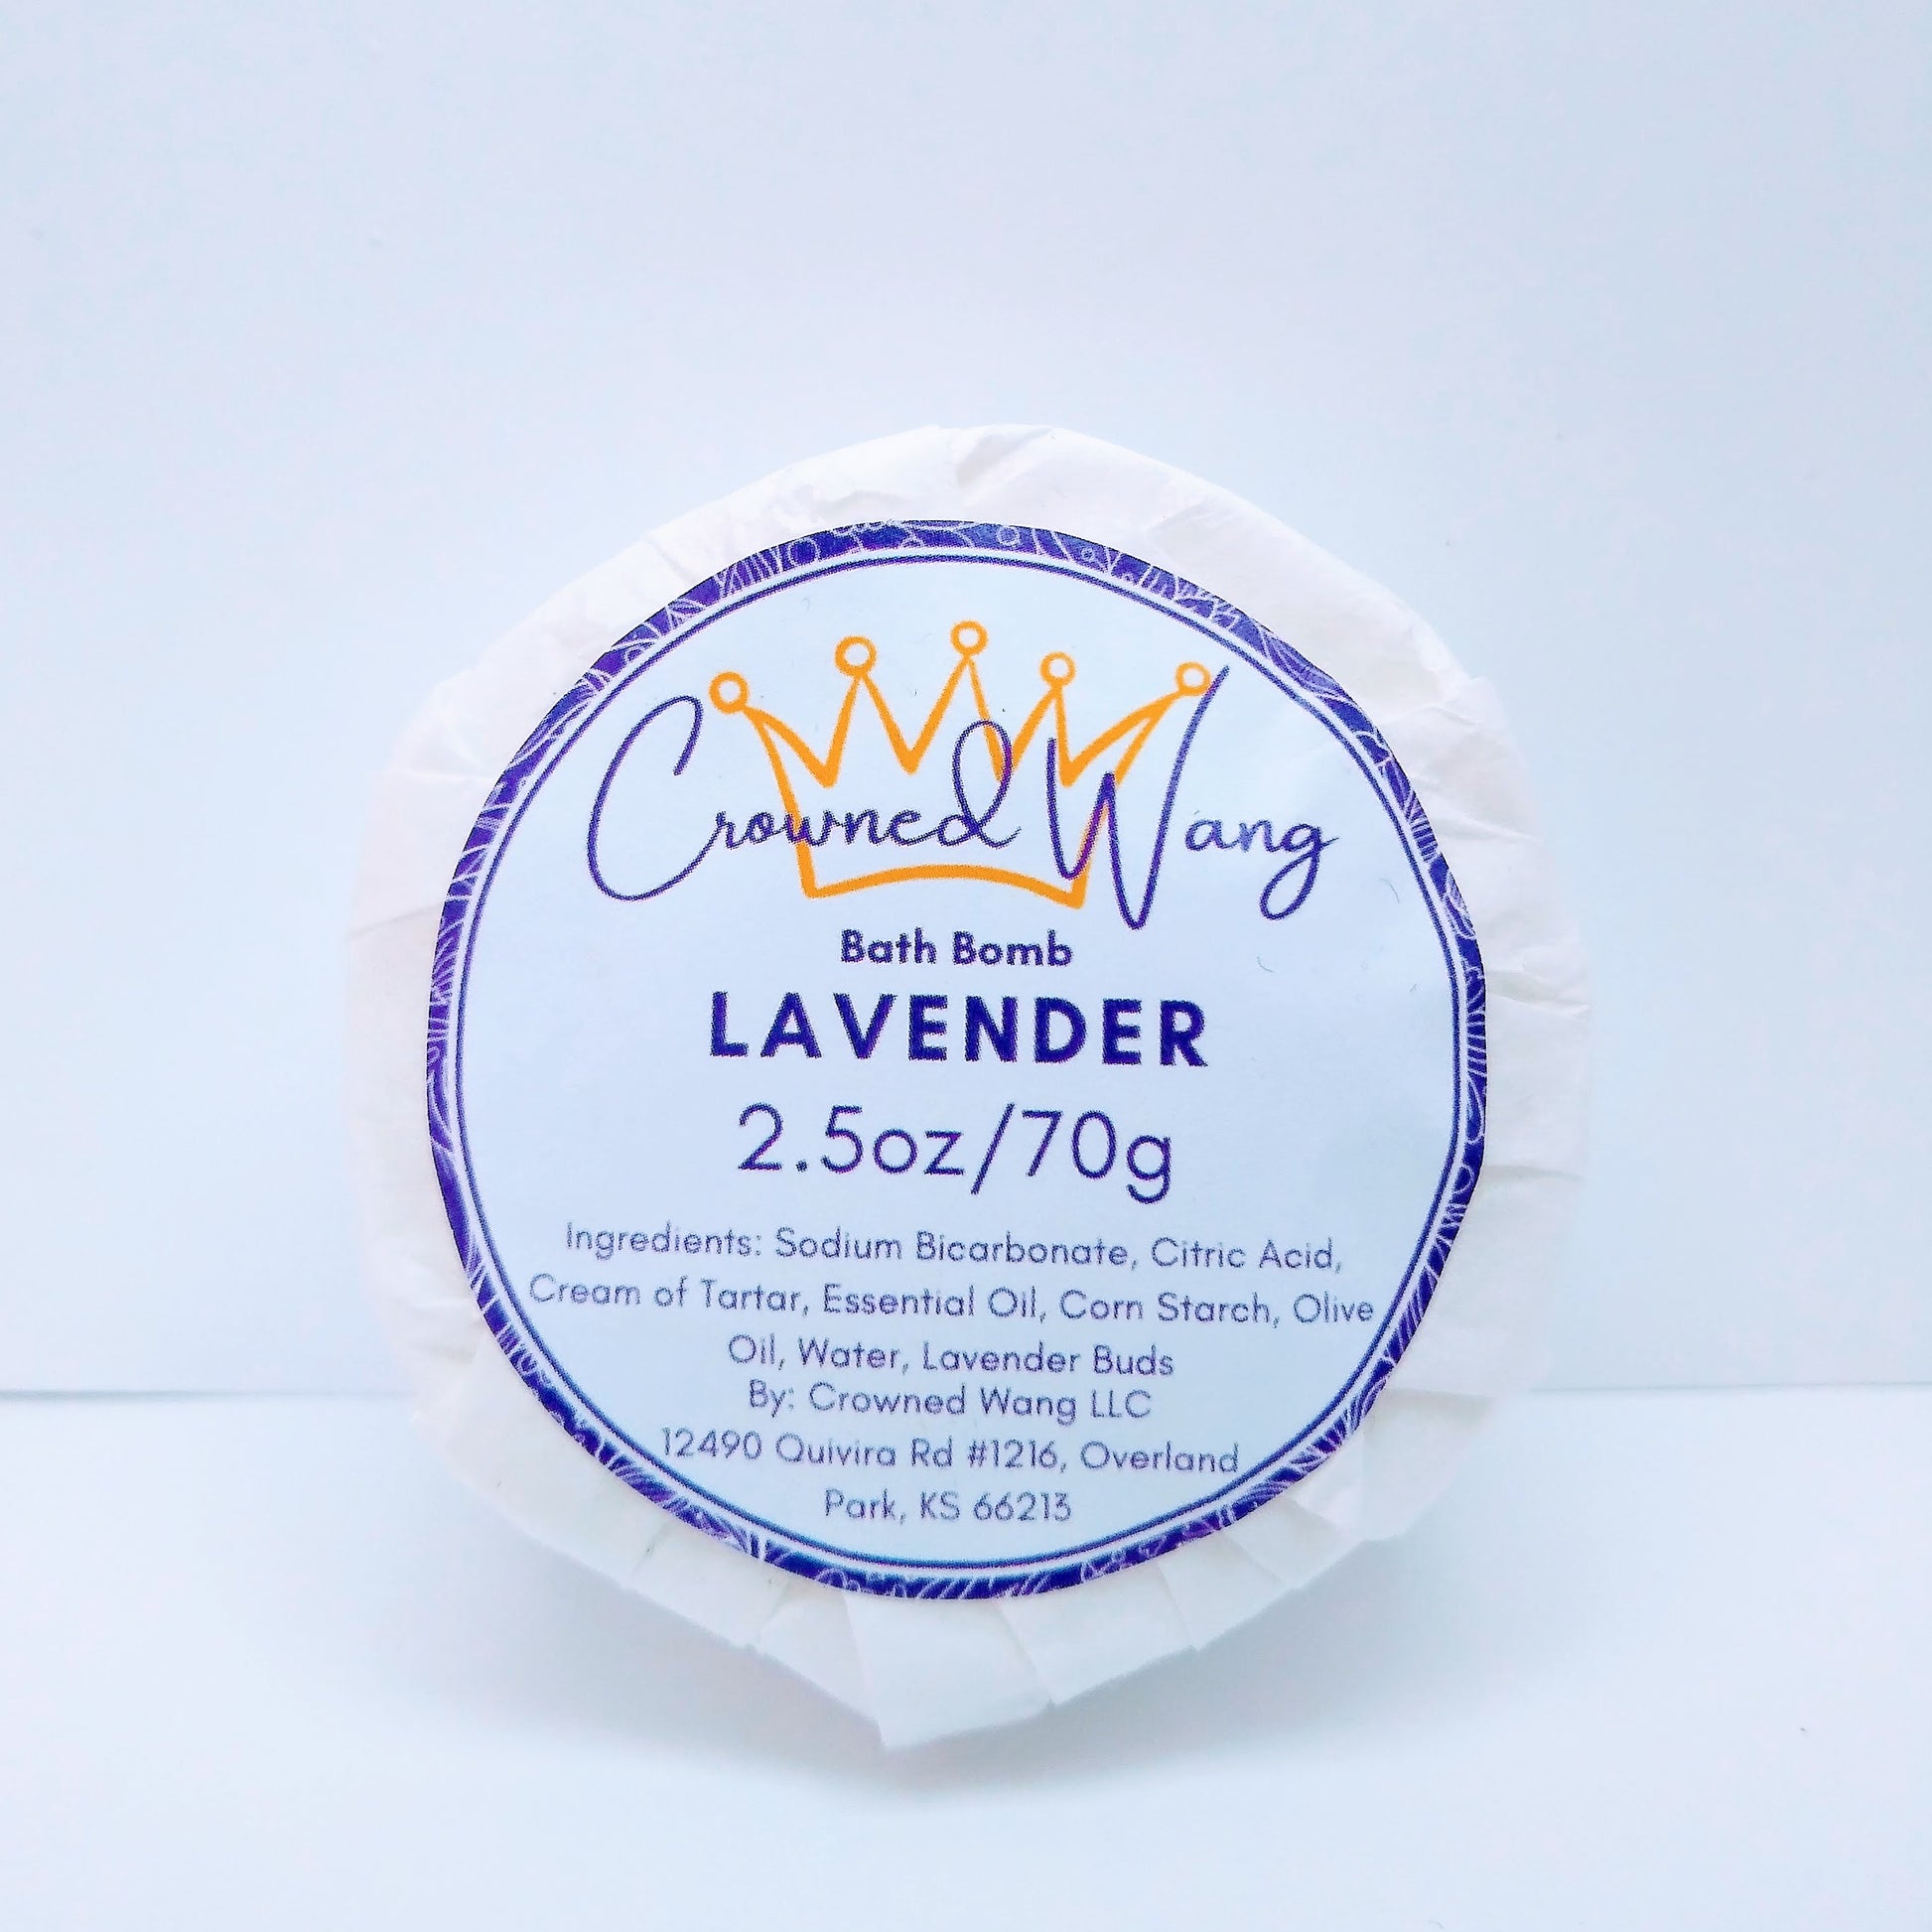 Crowned Wang brand 2.5oz lavender bath bomb with purple and white label. The label also includes a yellow crown outline.